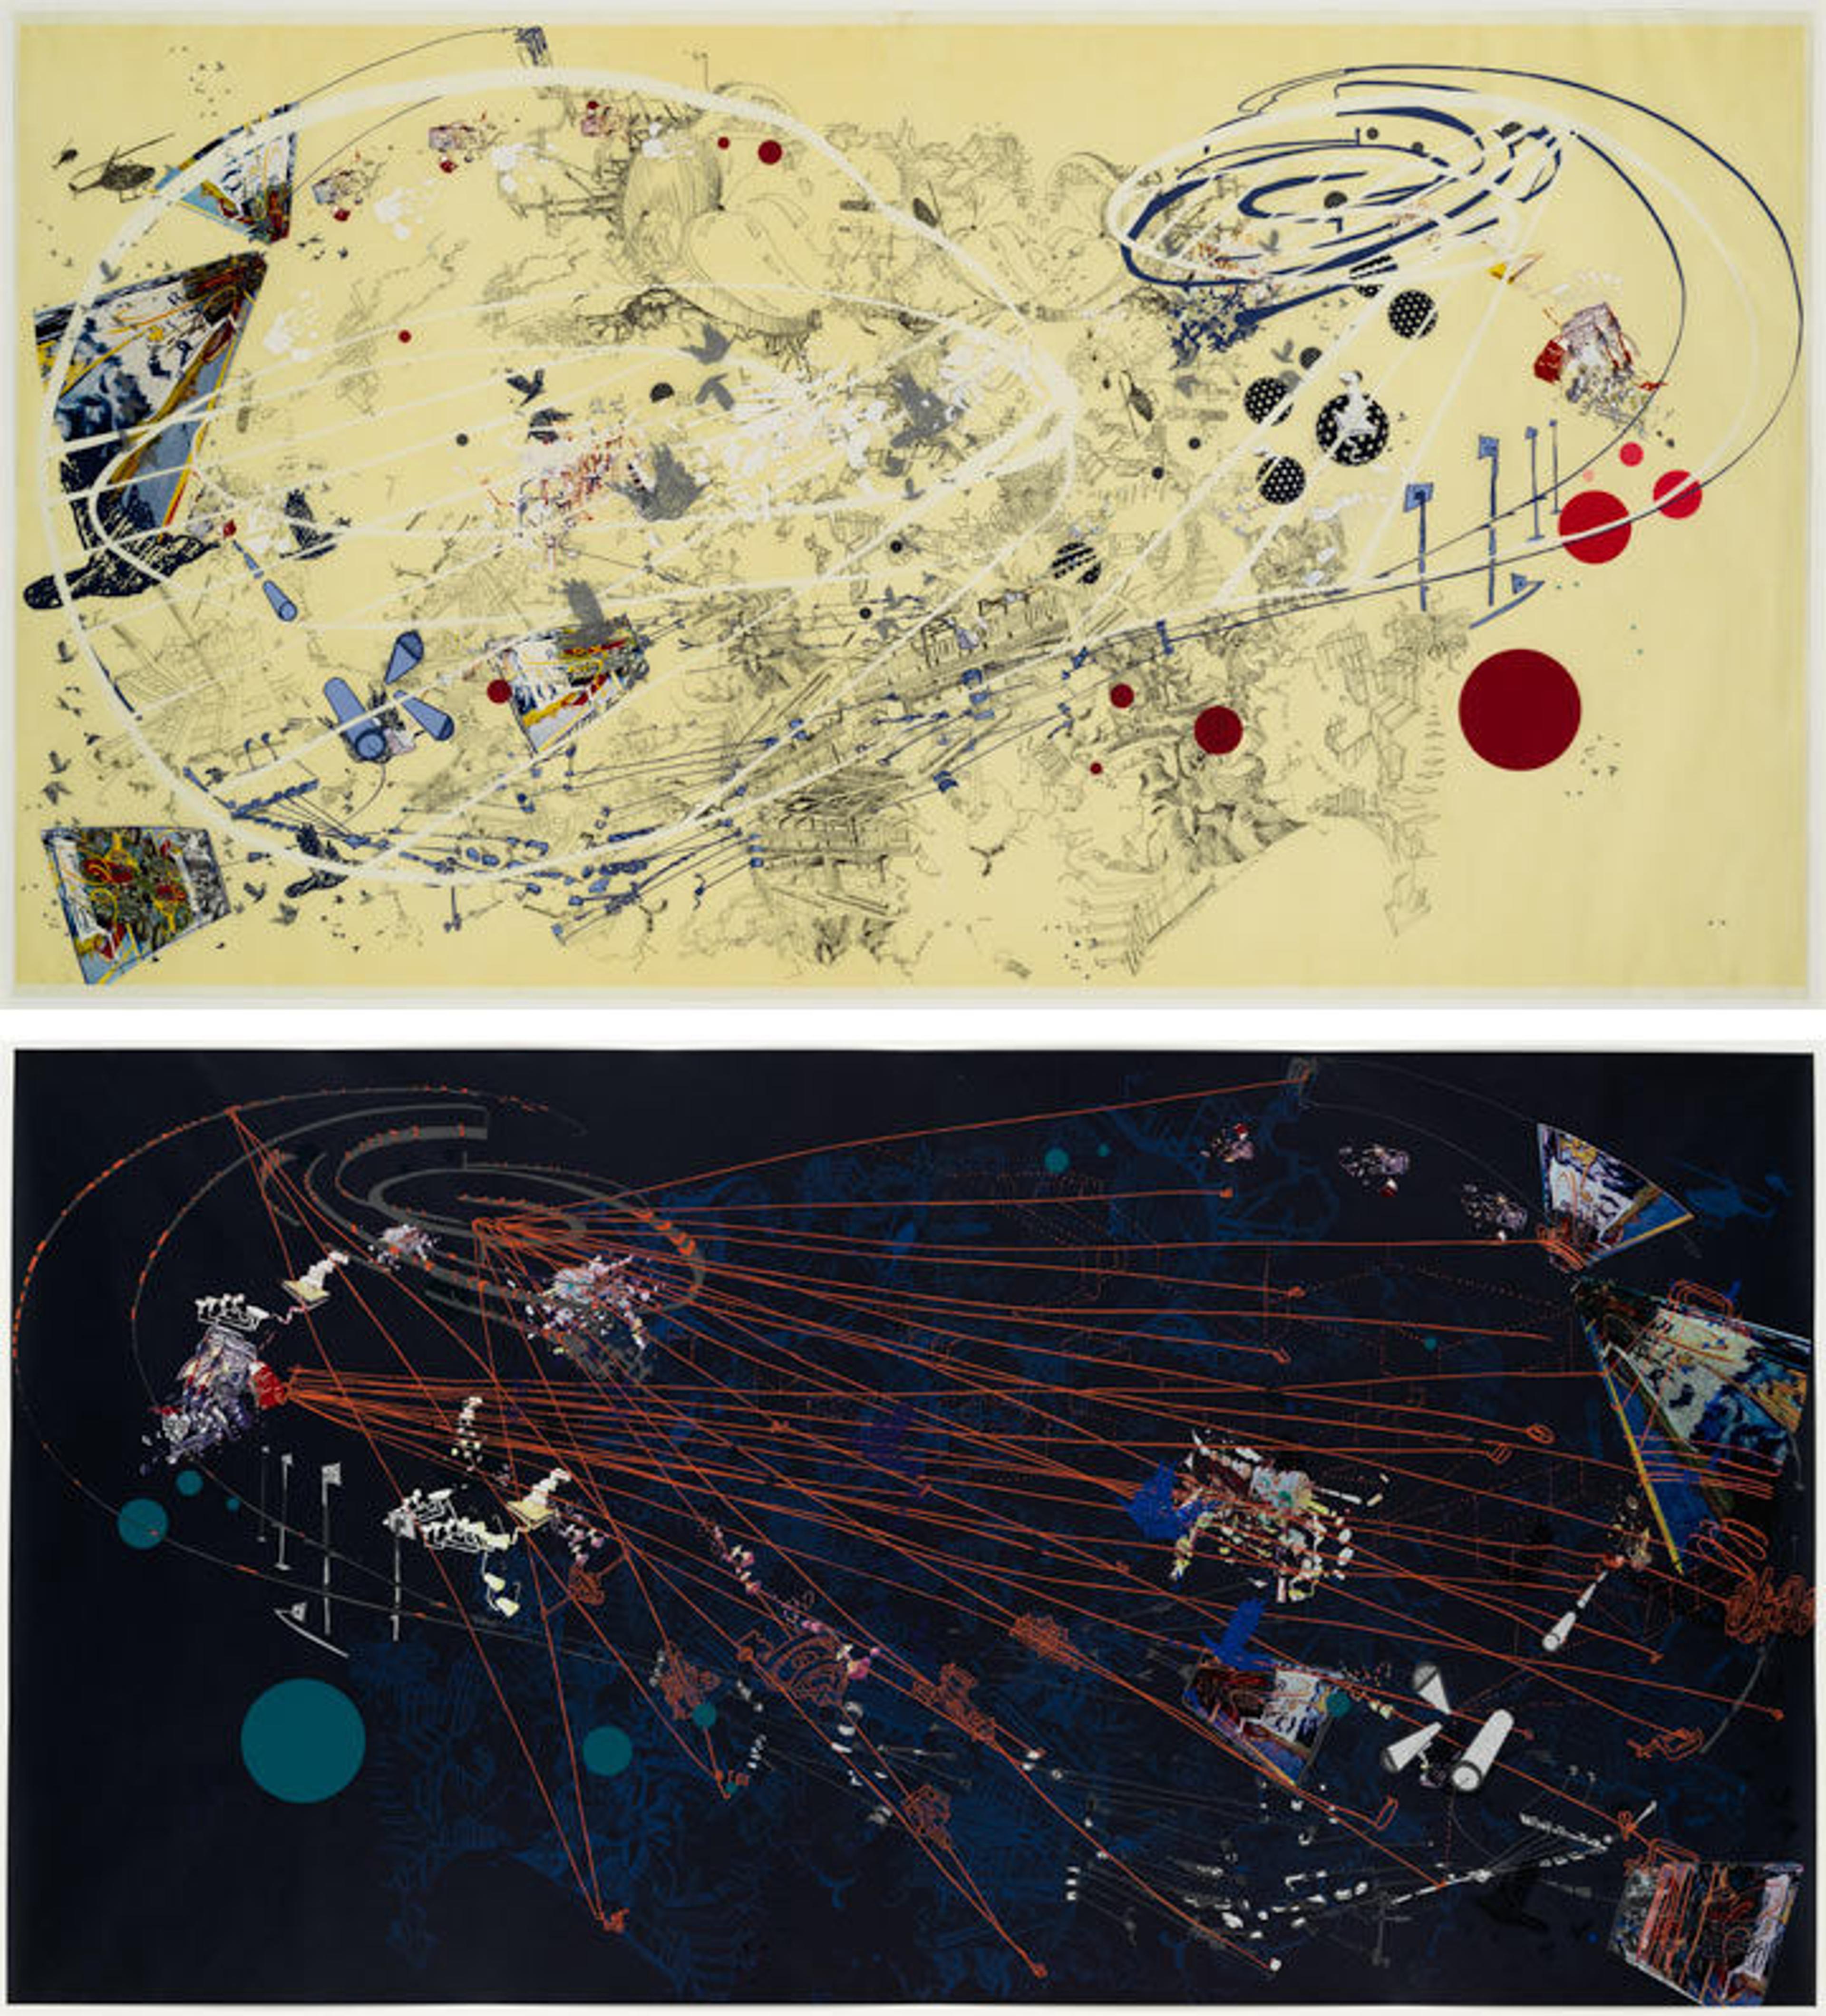 Sarah Sze's 'Untitled [Day]' (top) and 'Night' (bottom), two lithographs with abstract designs